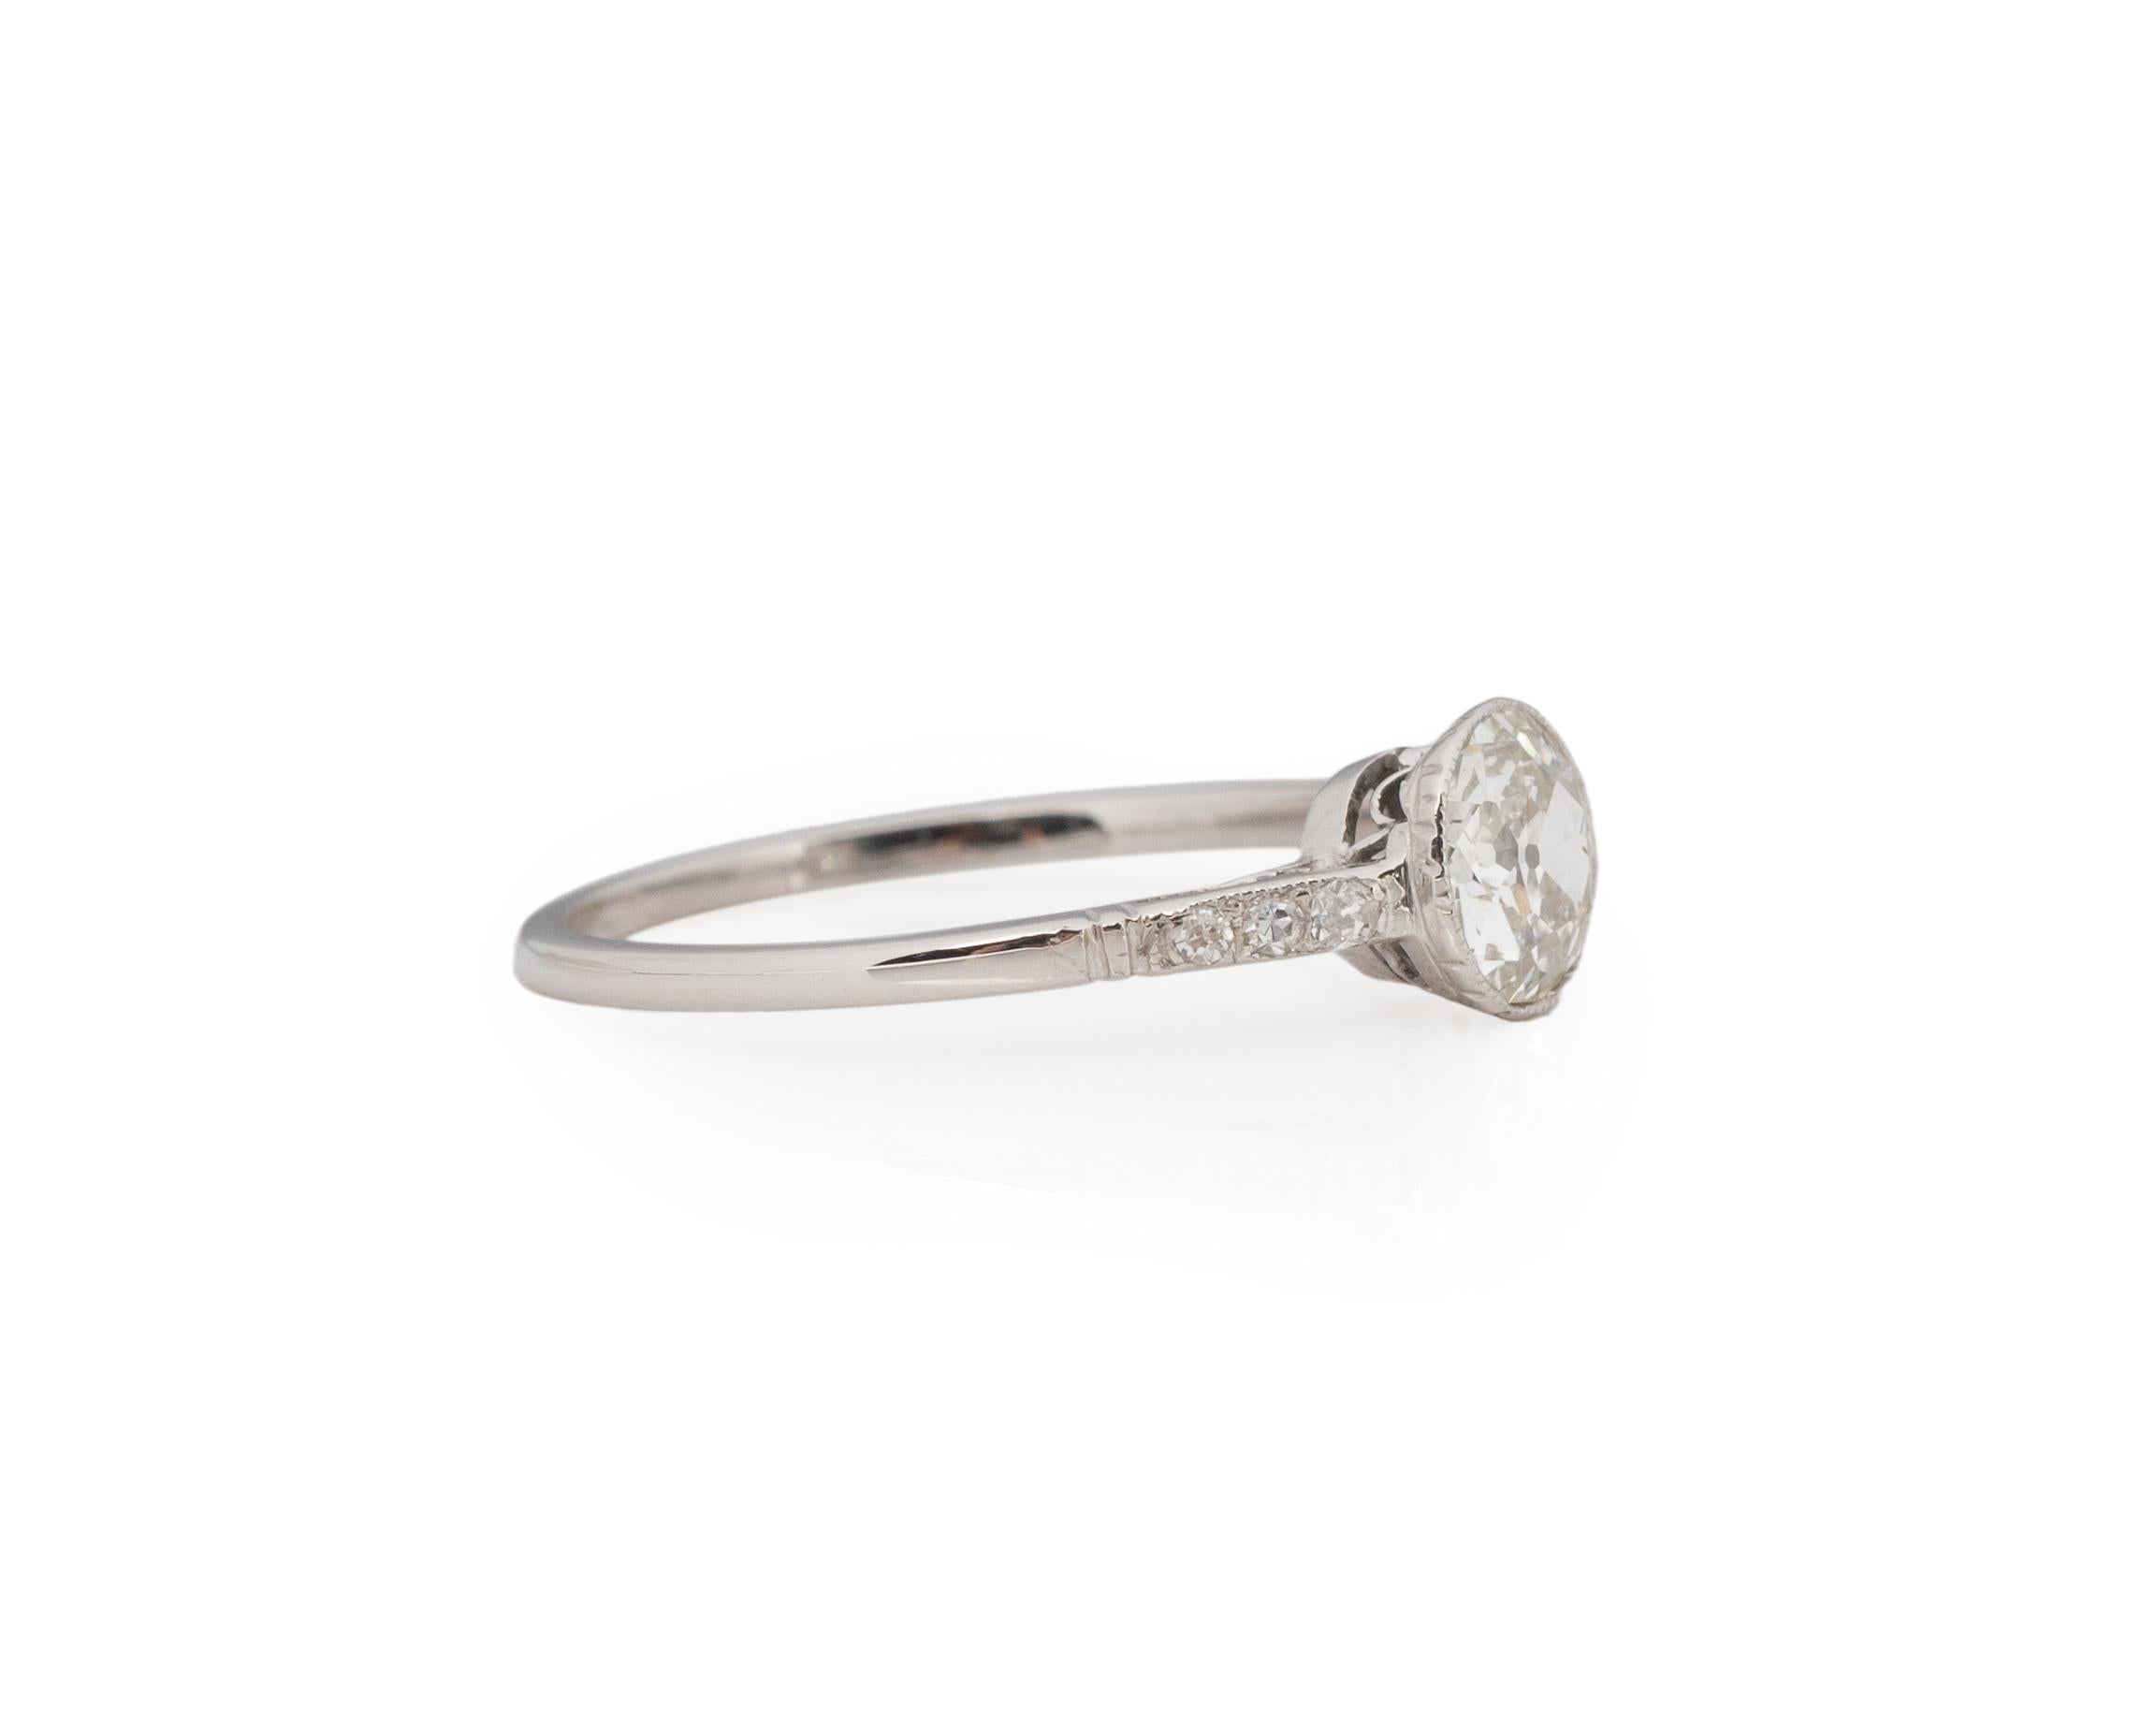 Ring Size: 7.5
Metal Type: 14K White Gold [Hallmarked, and Tested]
Weight: 1.5 grams

Center Diamond Details:
GIA LAB REPORT #: 519378737
Weight: .74ct
Cut: Old European brilliant
Color: I
Clarity: SI2
Measurements: 6.16mm x 5.82mm x 2.89mm

Side